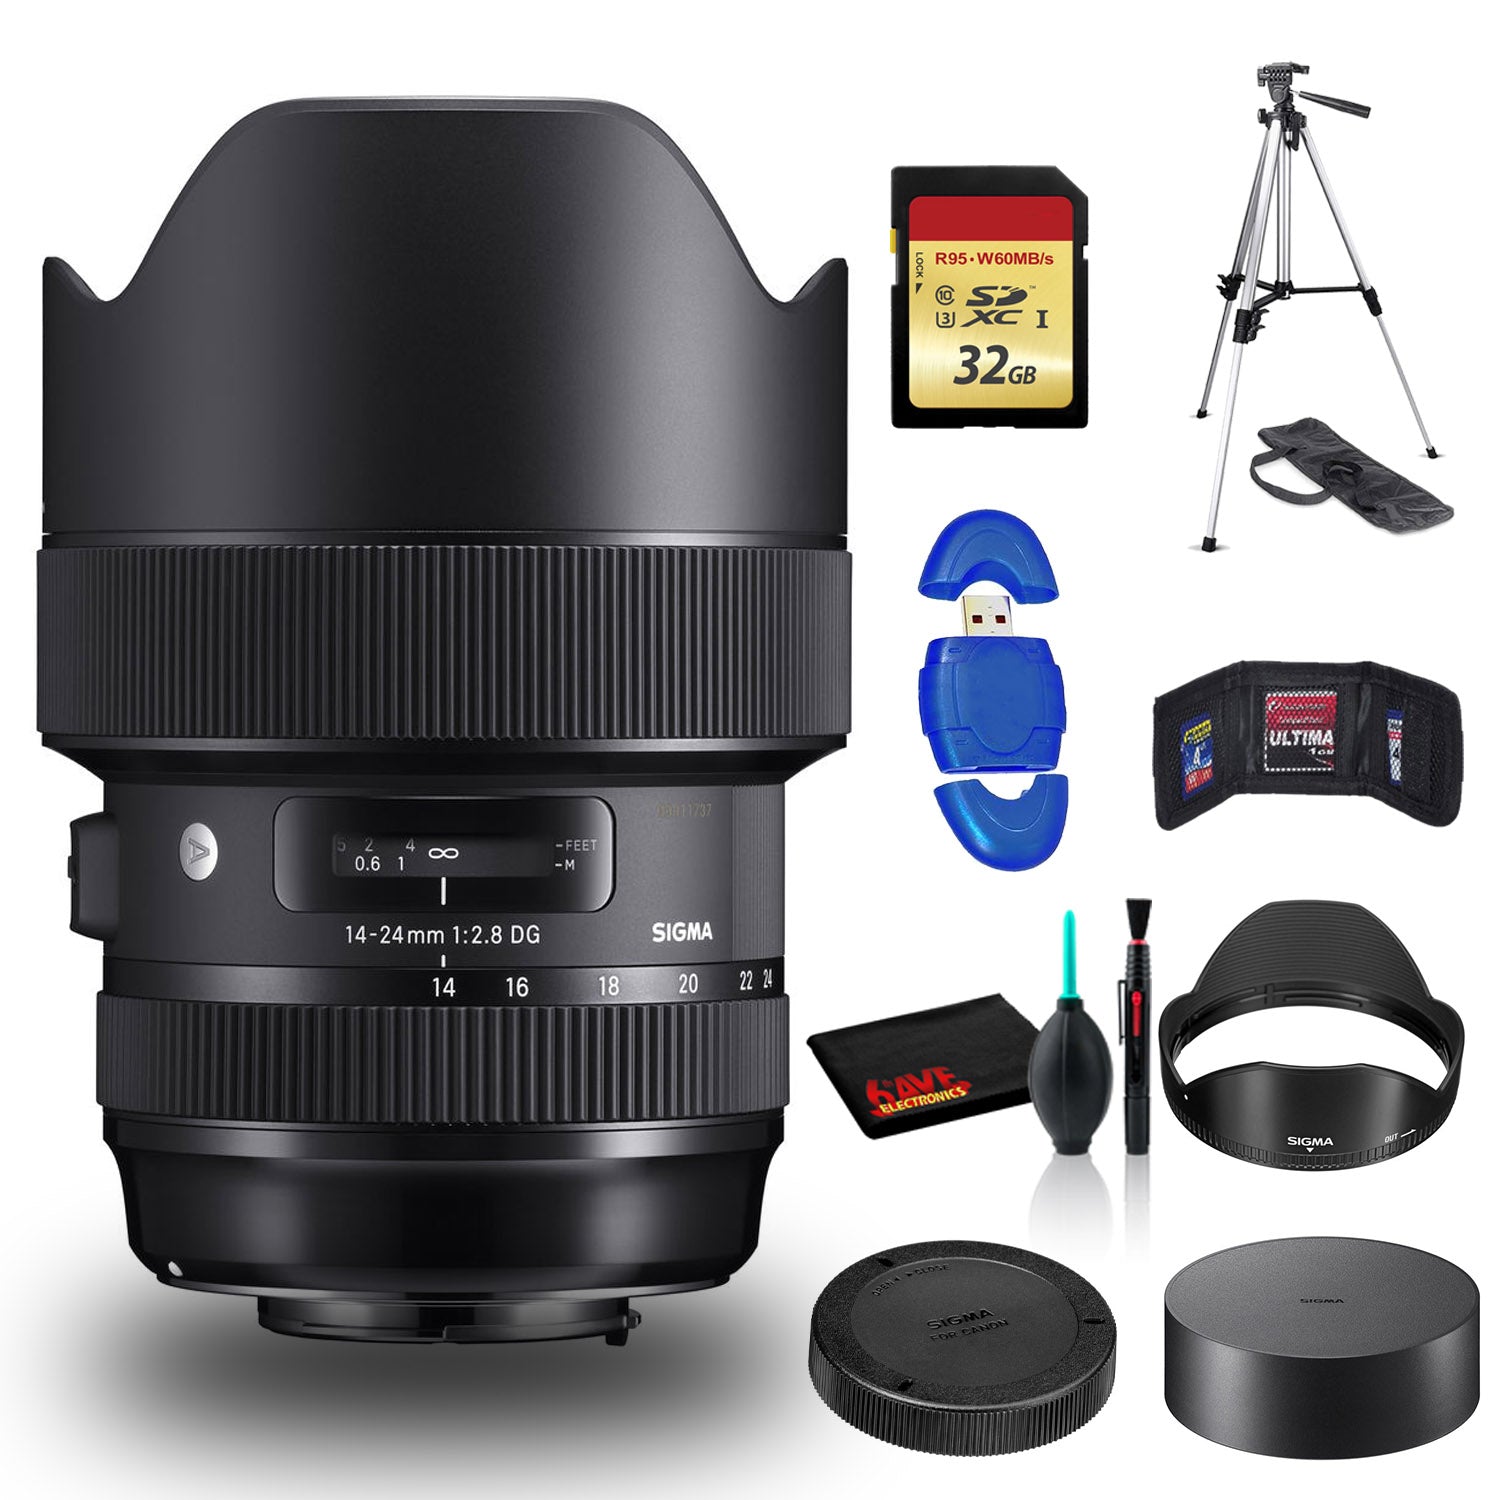 Sigma 14-24mm f/2.8 DG HSM Art Lens for Canon EF with Cleaning Kit, Full Size Tripod, and 32GB Memory Kit Bundle